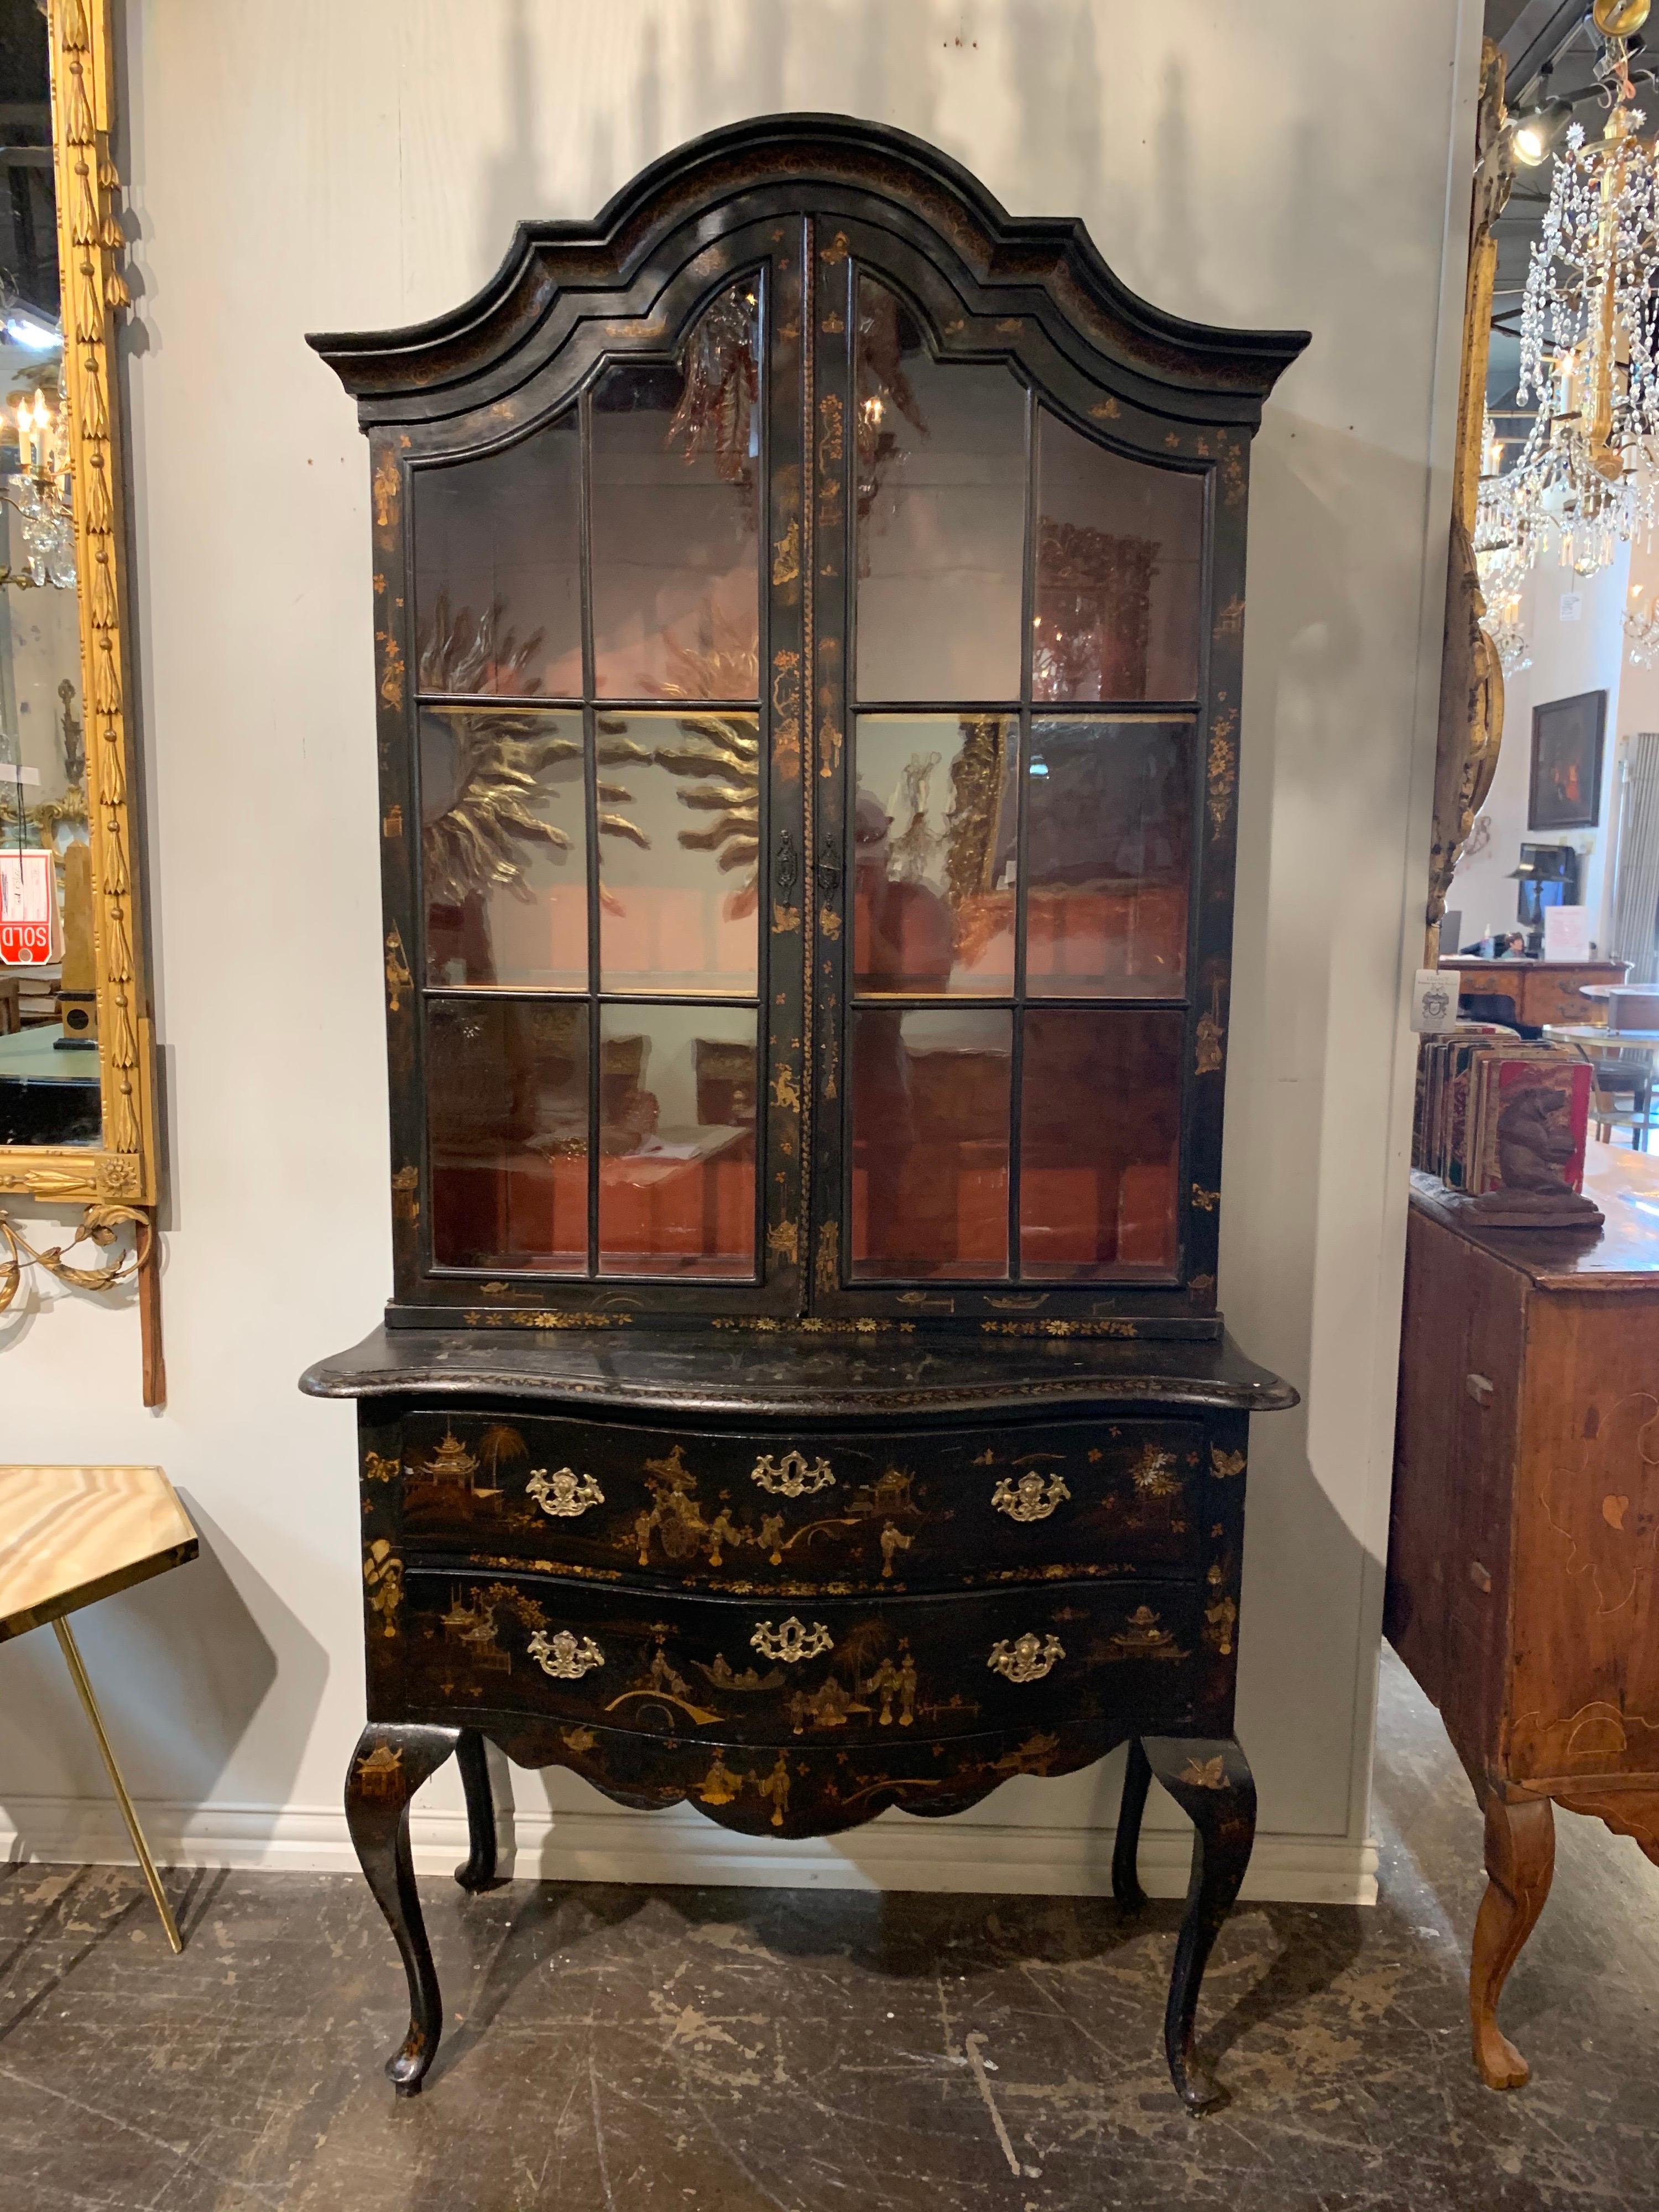 Gorgeous 19th century English Queen Anne chinoiserie 2 part cabinet. Very fine painted scenes on the front and sides on the piece. And there 3 shelves for storage and display. So pretty!